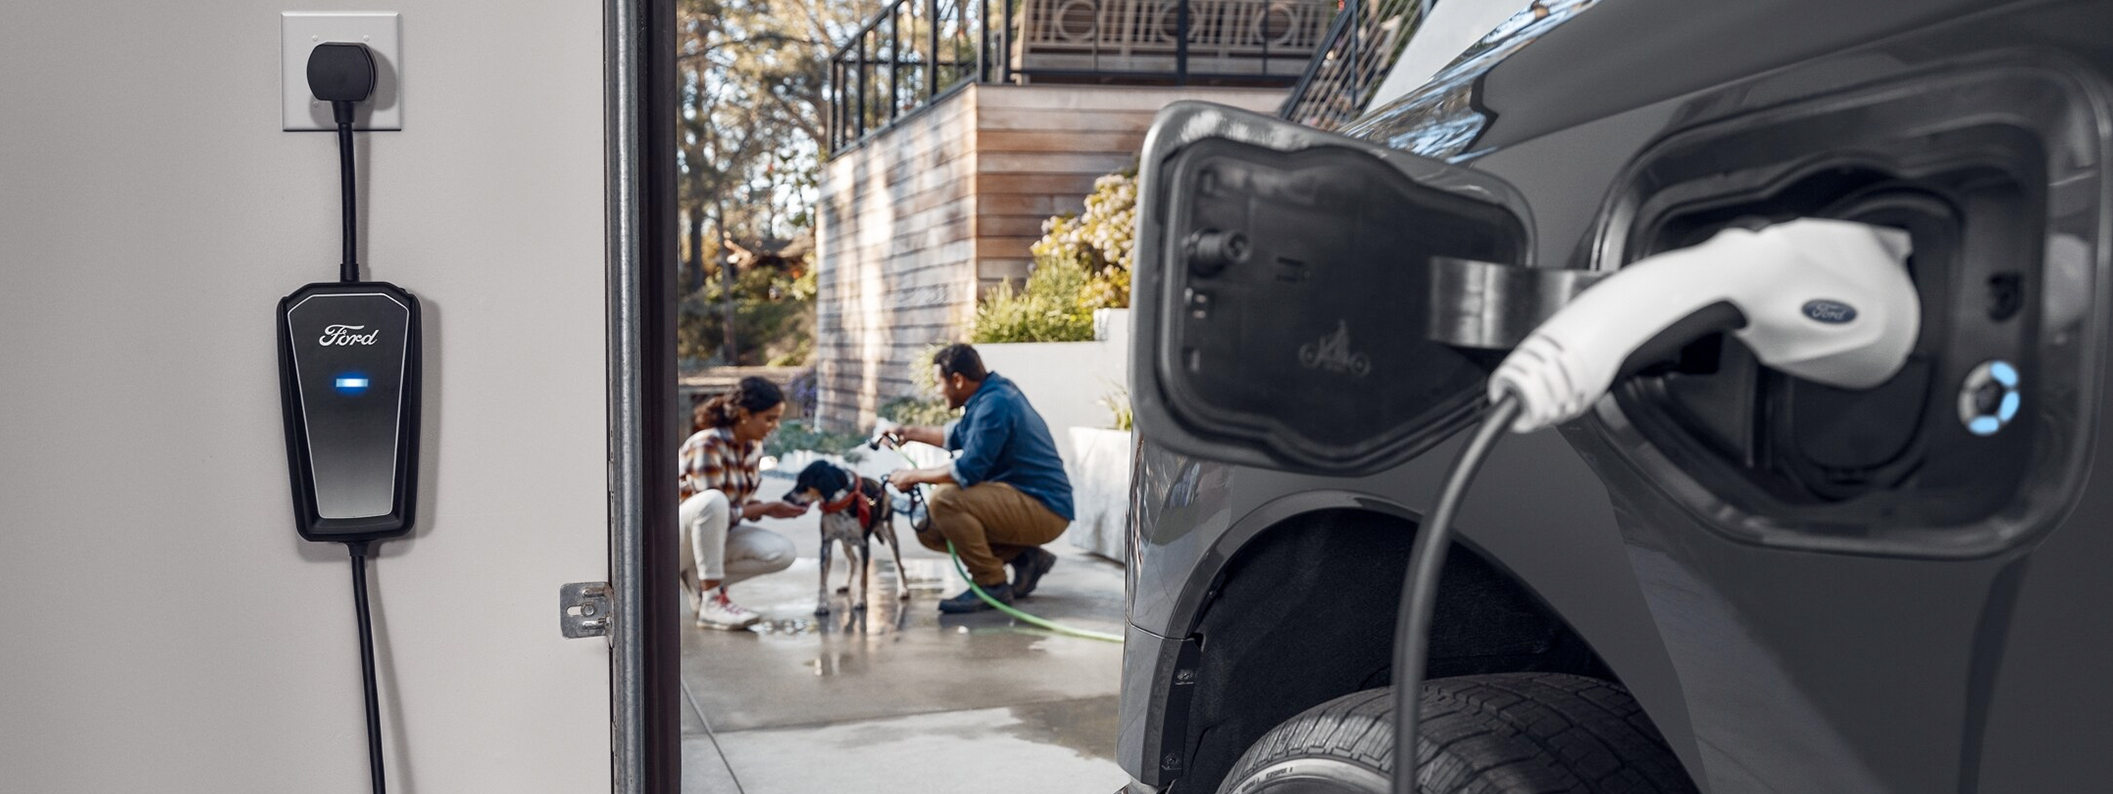 A Ford F-150® Lightning being charged inside a garage next to two people washing a dog